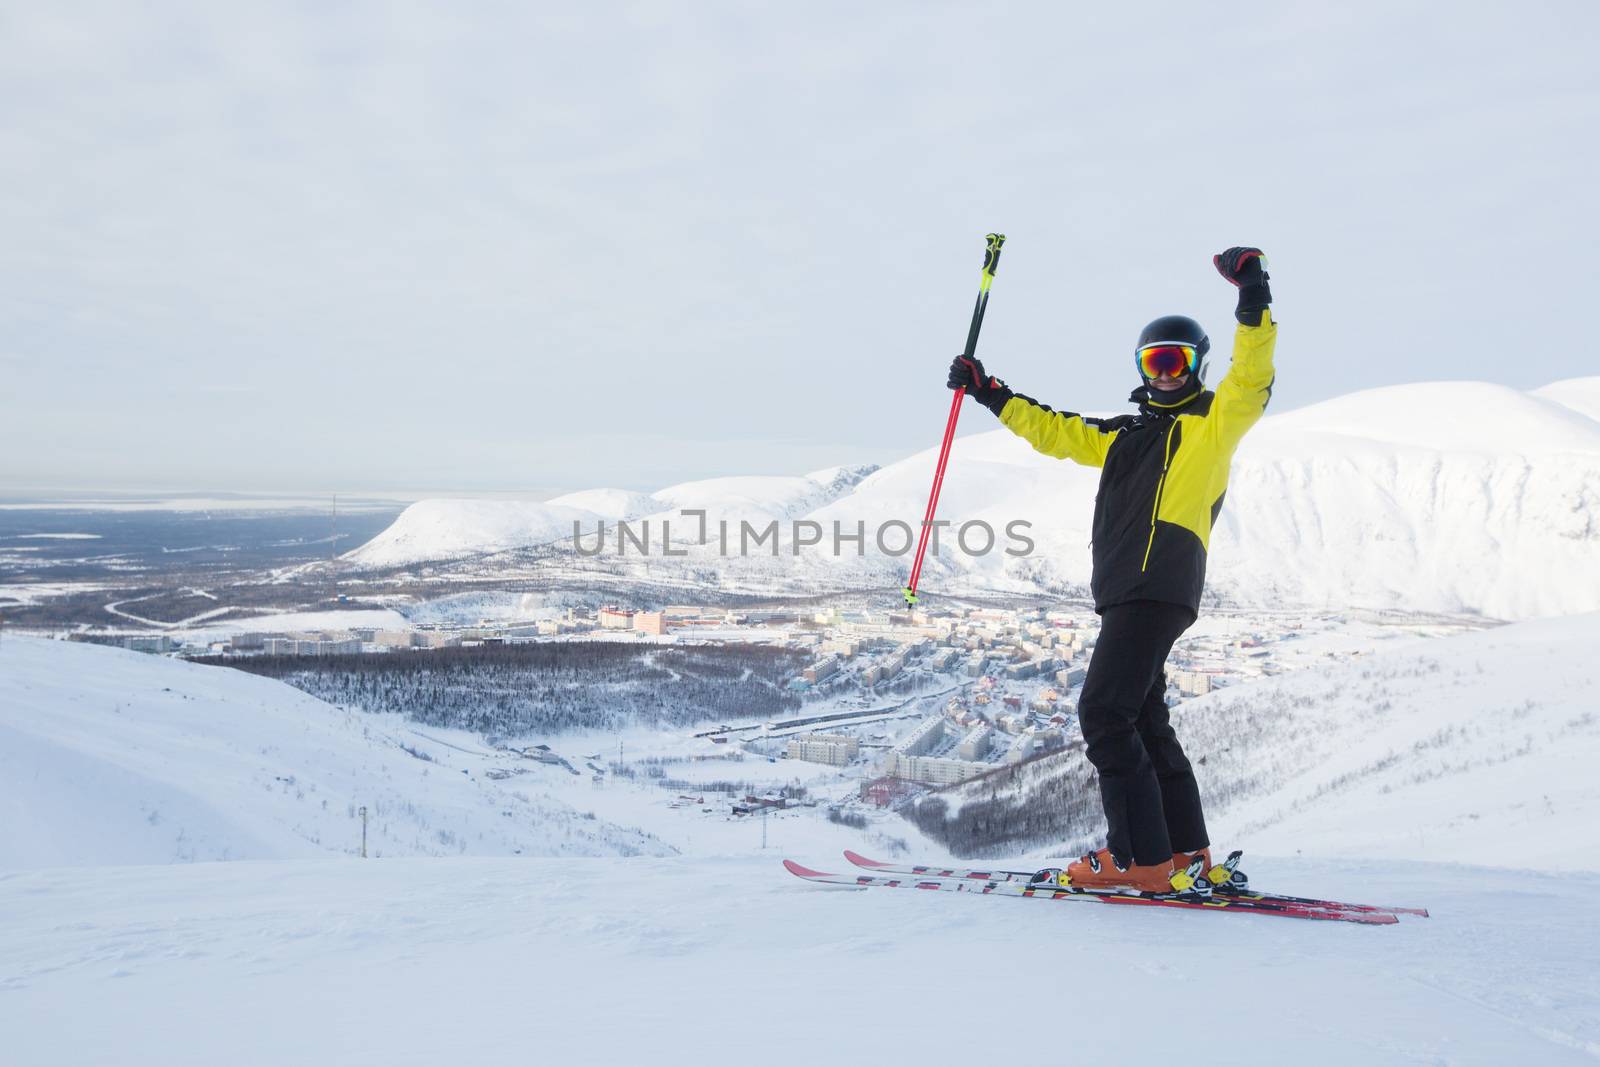 Kirovsk, Russia - Skier on piste in high mountains on ski slope. Rear view. Winter snowboard and skiing concept. Khibiny Mountains, Kola Peninsula panoramic view on town